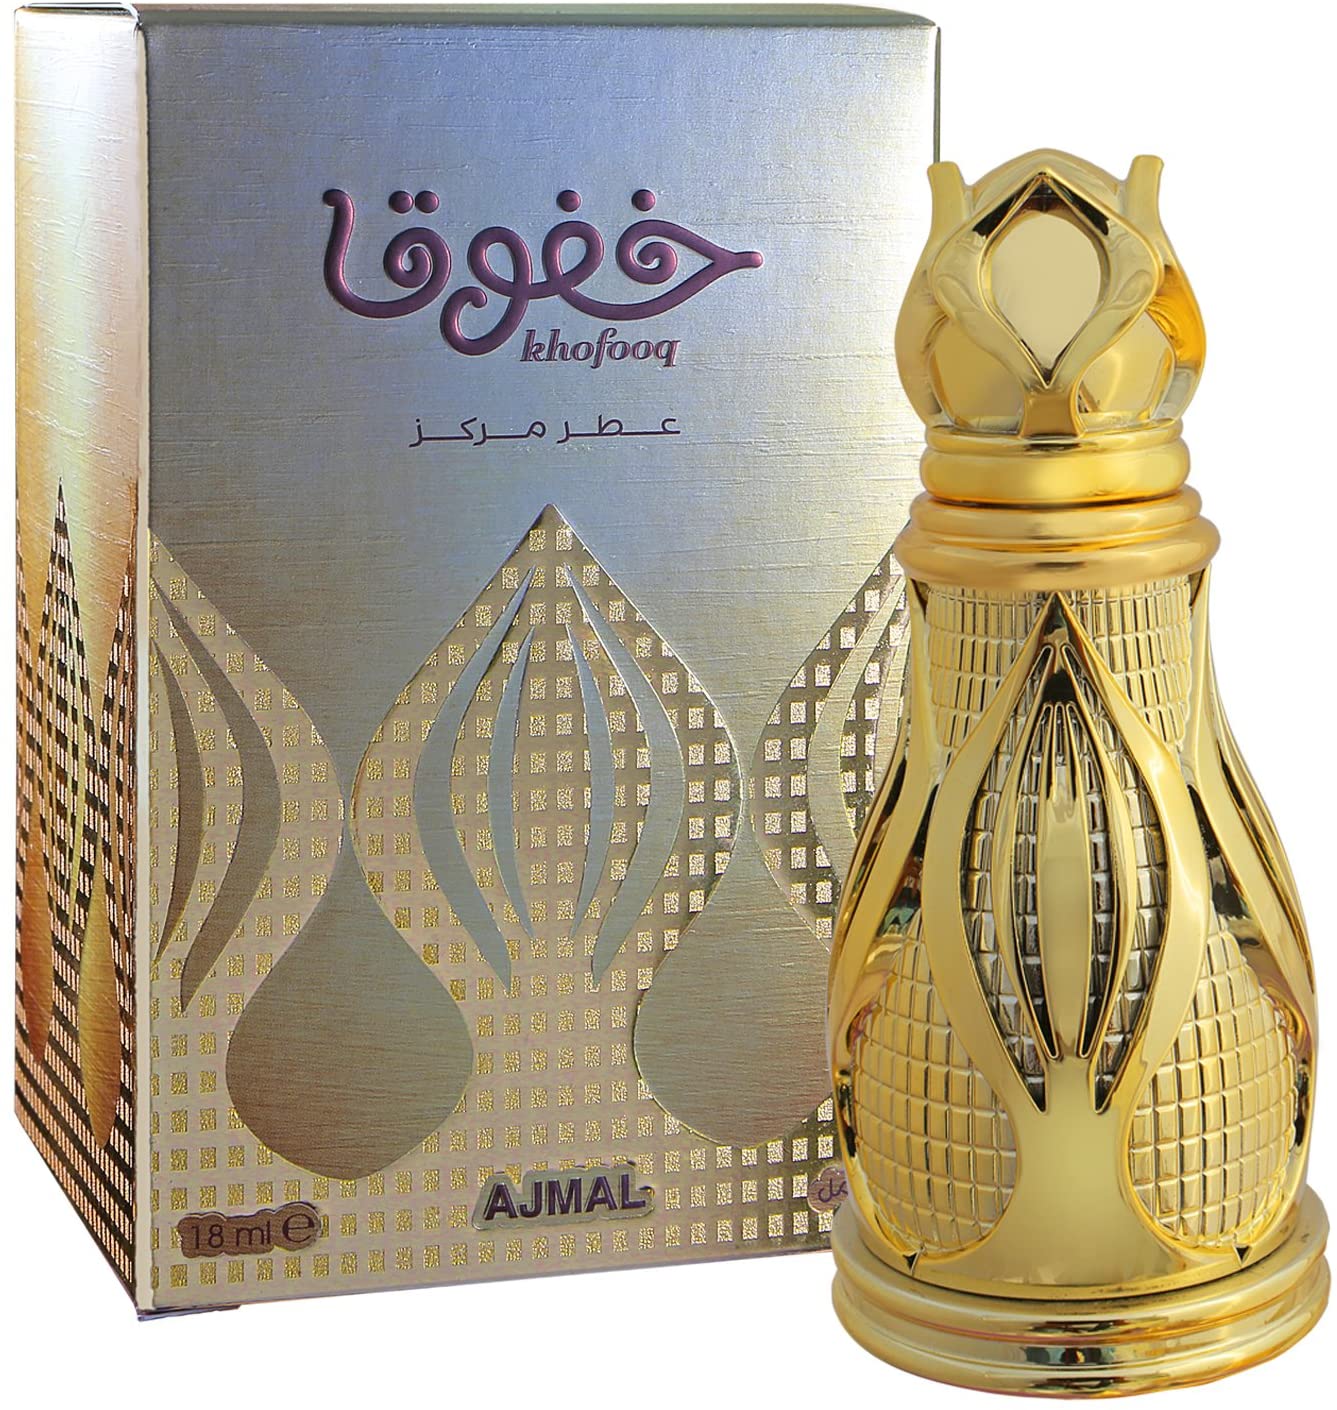 Buy Khofooq Concentrated by Ajmal for Unisex 18mL | Arablly.com